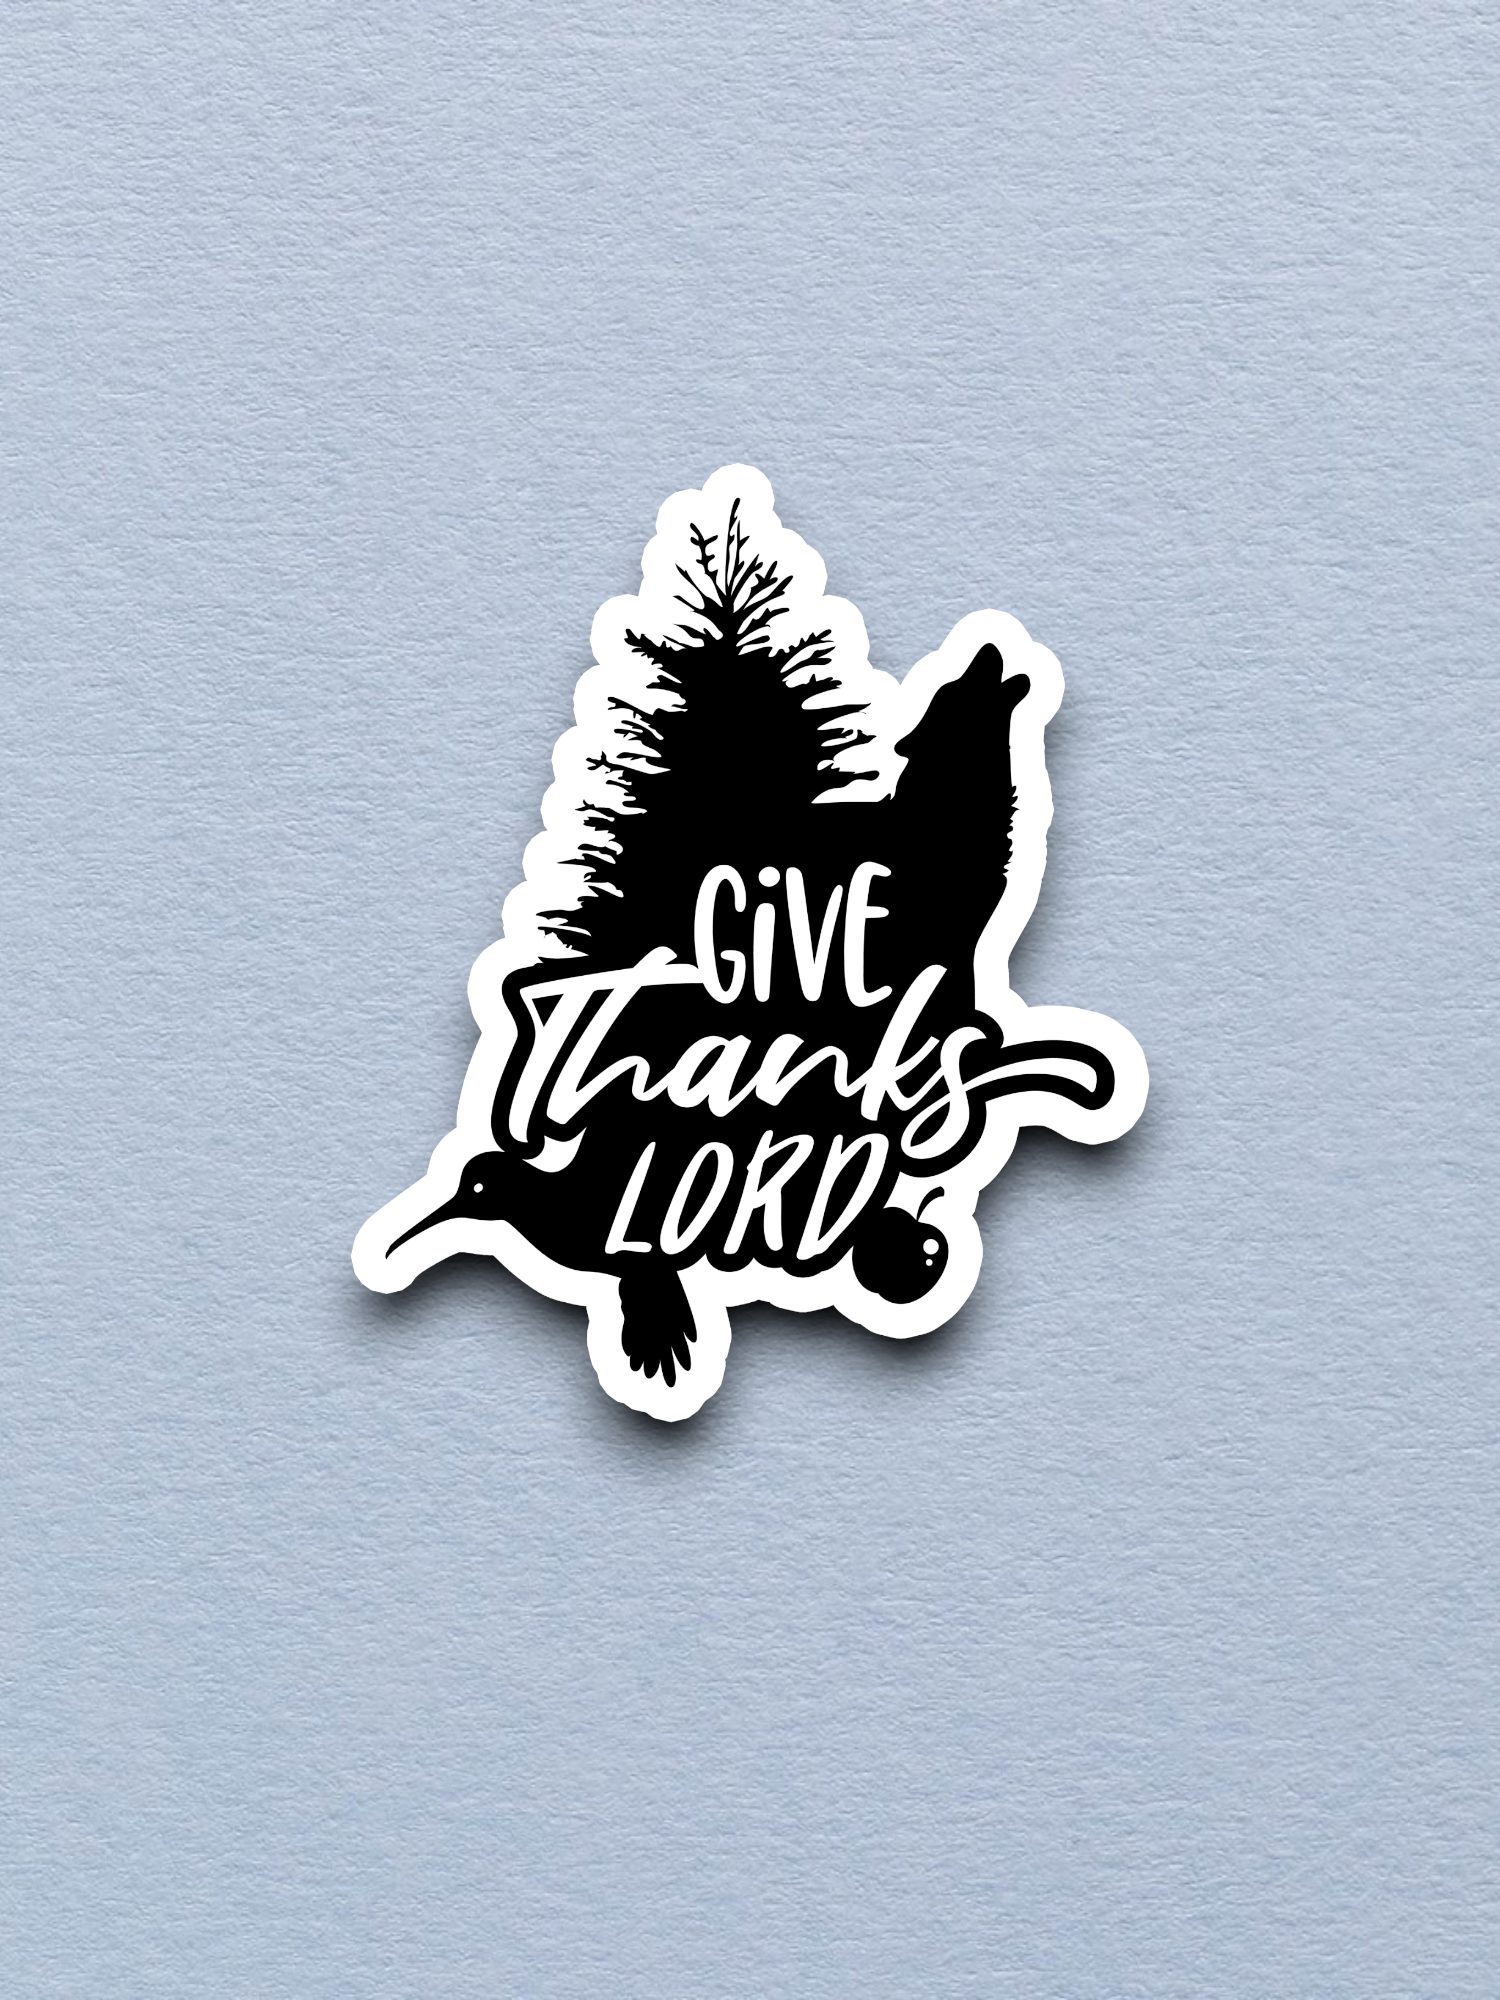 Give Thanks Lord 01 - Faith Sticker